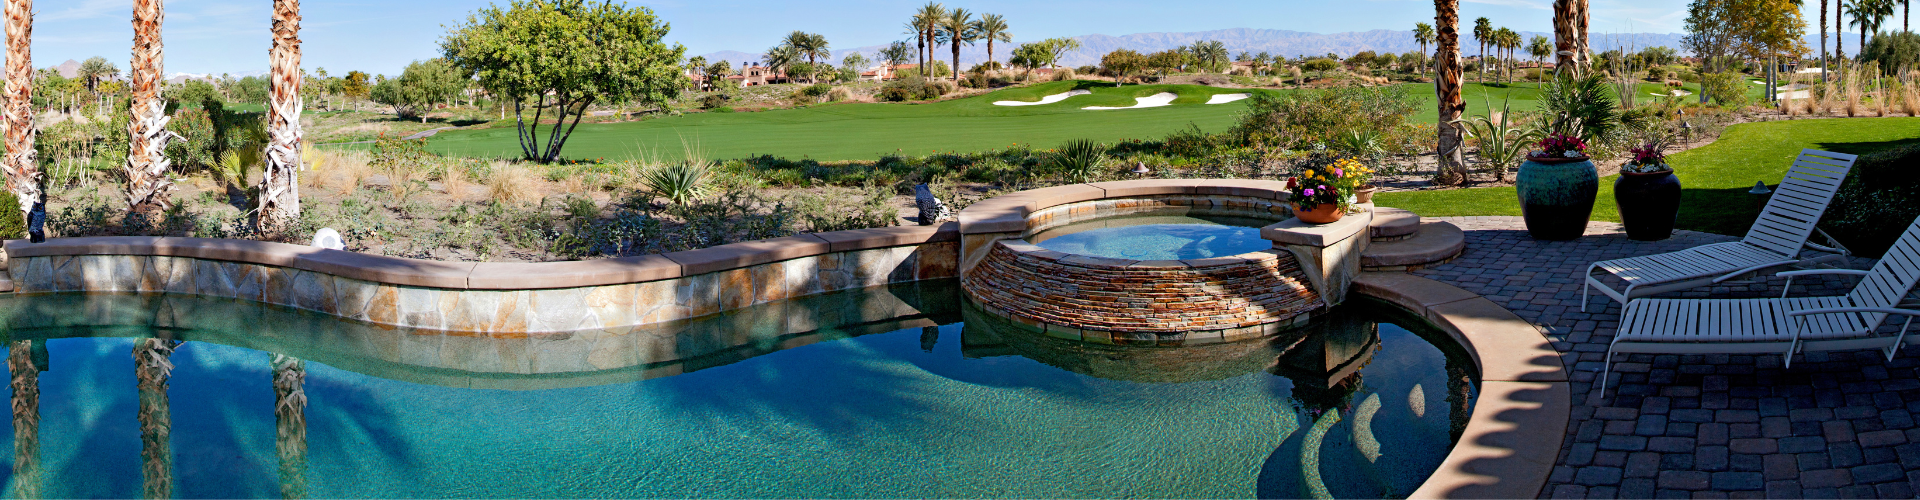 hot tub and pool beautifully landscaped with a view of a golf course in the background